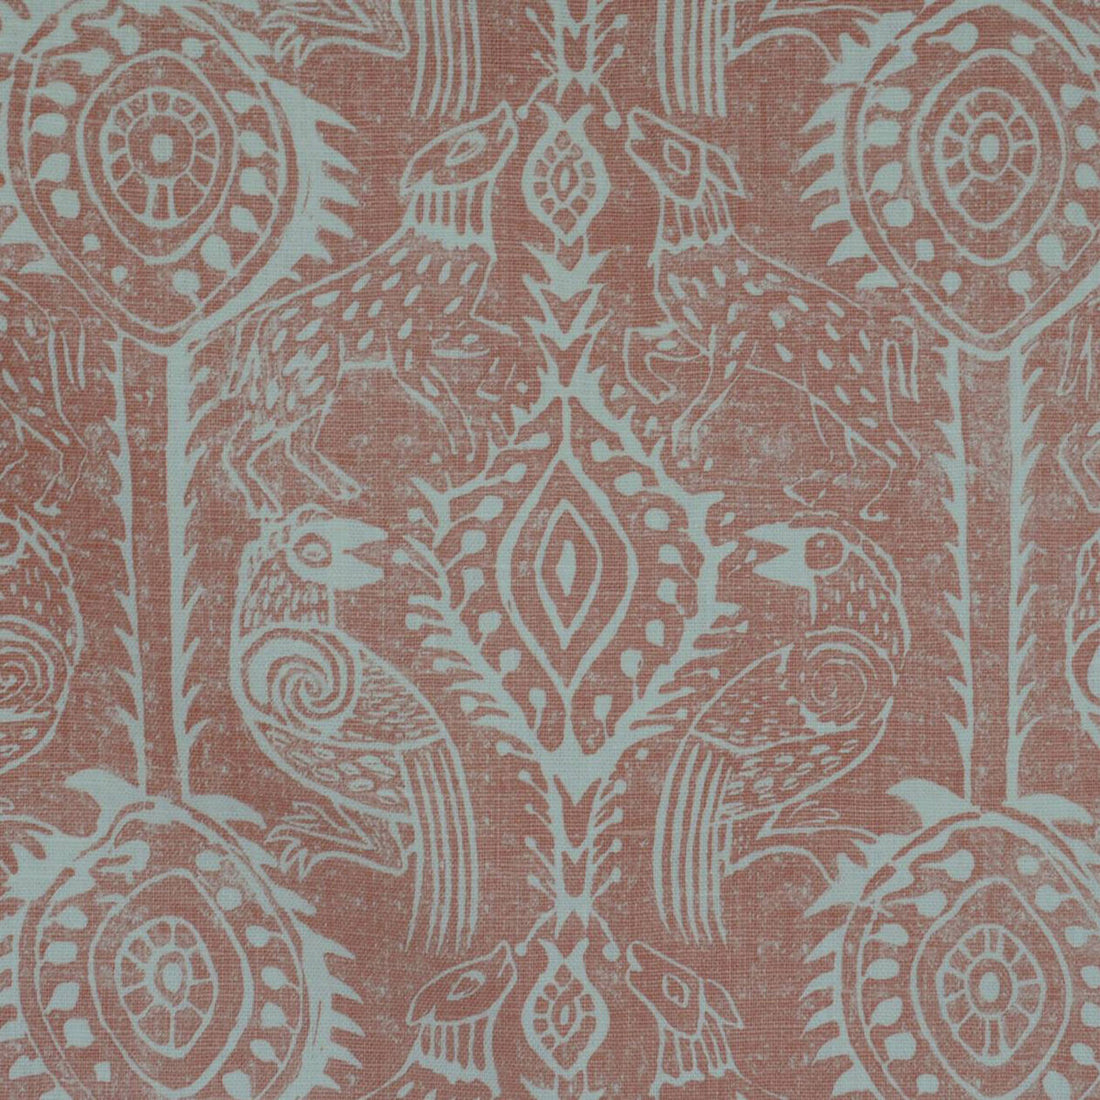 Beasties fabric in coral color - pattern BFC-3512.127.0 - by Lee Jofa in the Blithfield collection